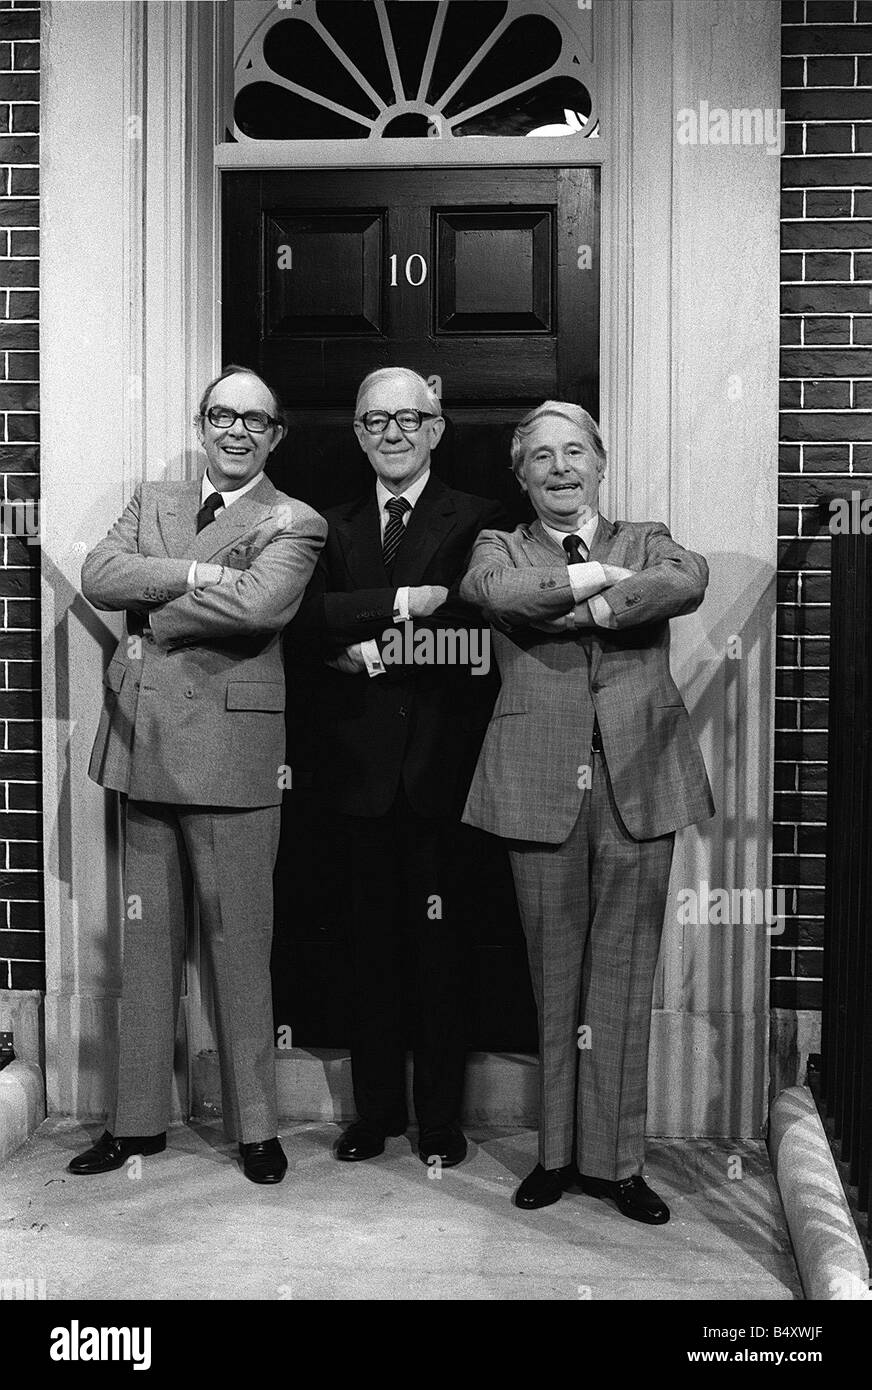 Sir Alec Guinness with Eric Morecambe and Ernie Wise appearing in the Morecambe and Wise Christmas show pose outside Number 10 Downing Street at Teddington Studios Stock Photo